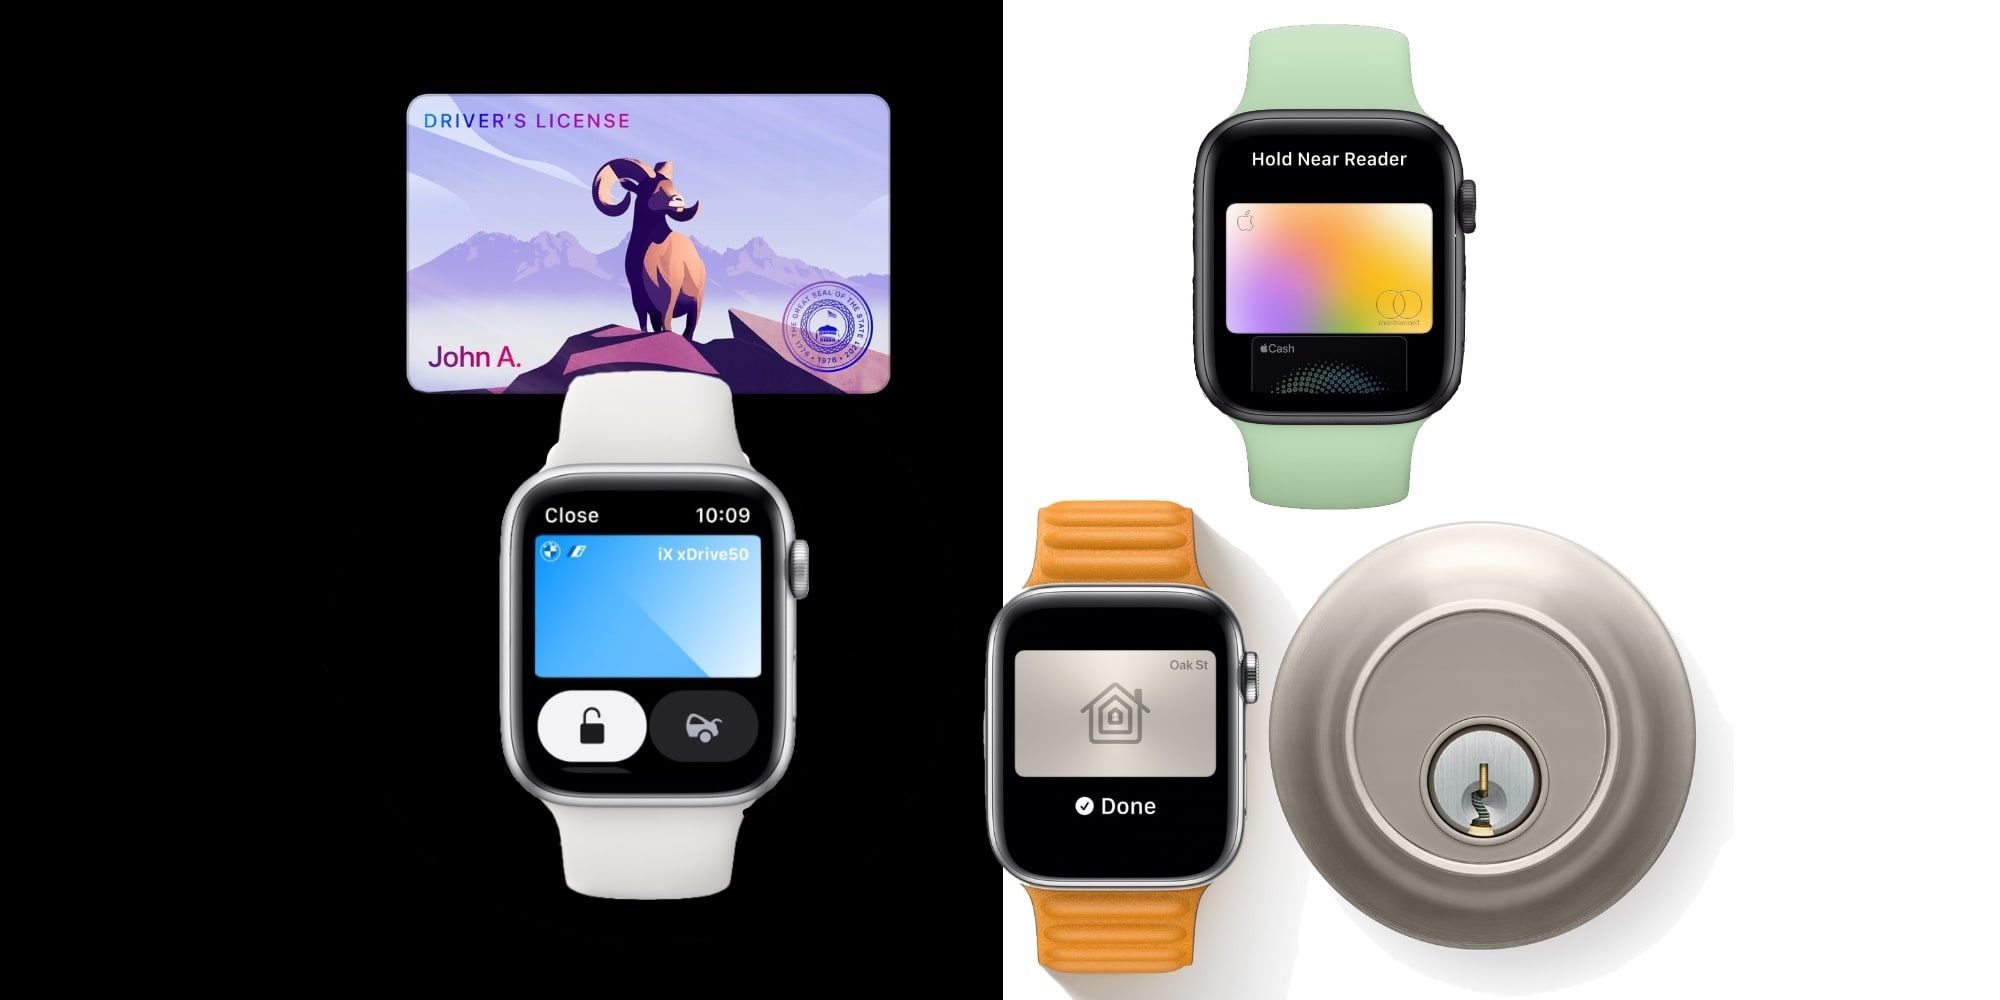 How Good Is Apple Watchs Wallet App & Can It Replace The Real Thing